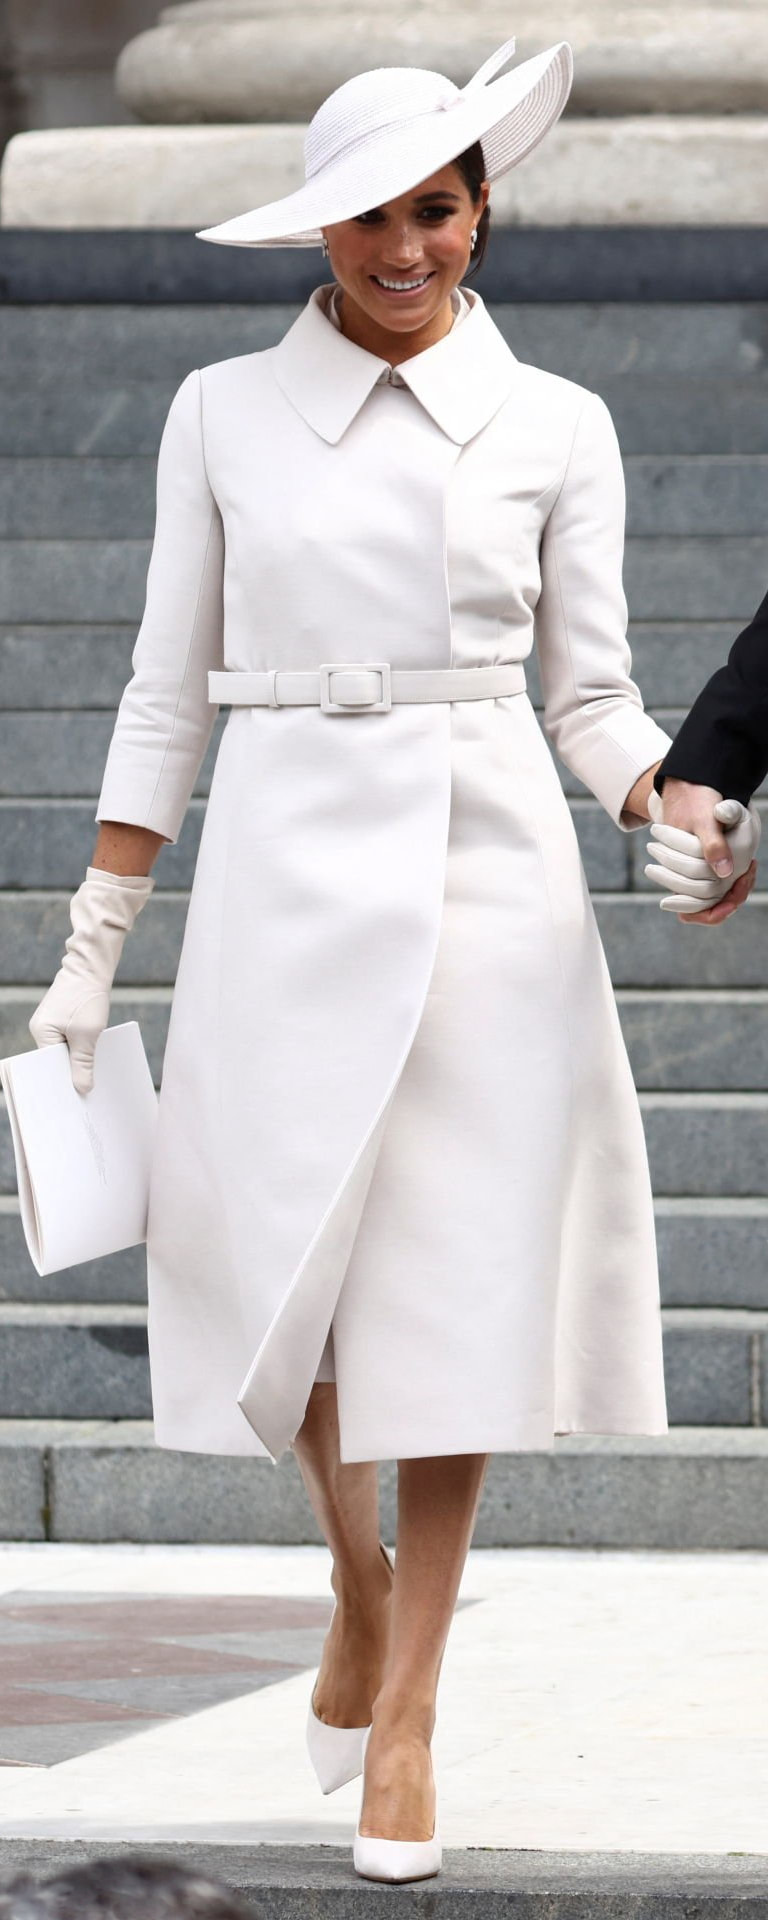 Dior Gloves In Greige as seen on Meghan Markle, The Duchess of Sussex